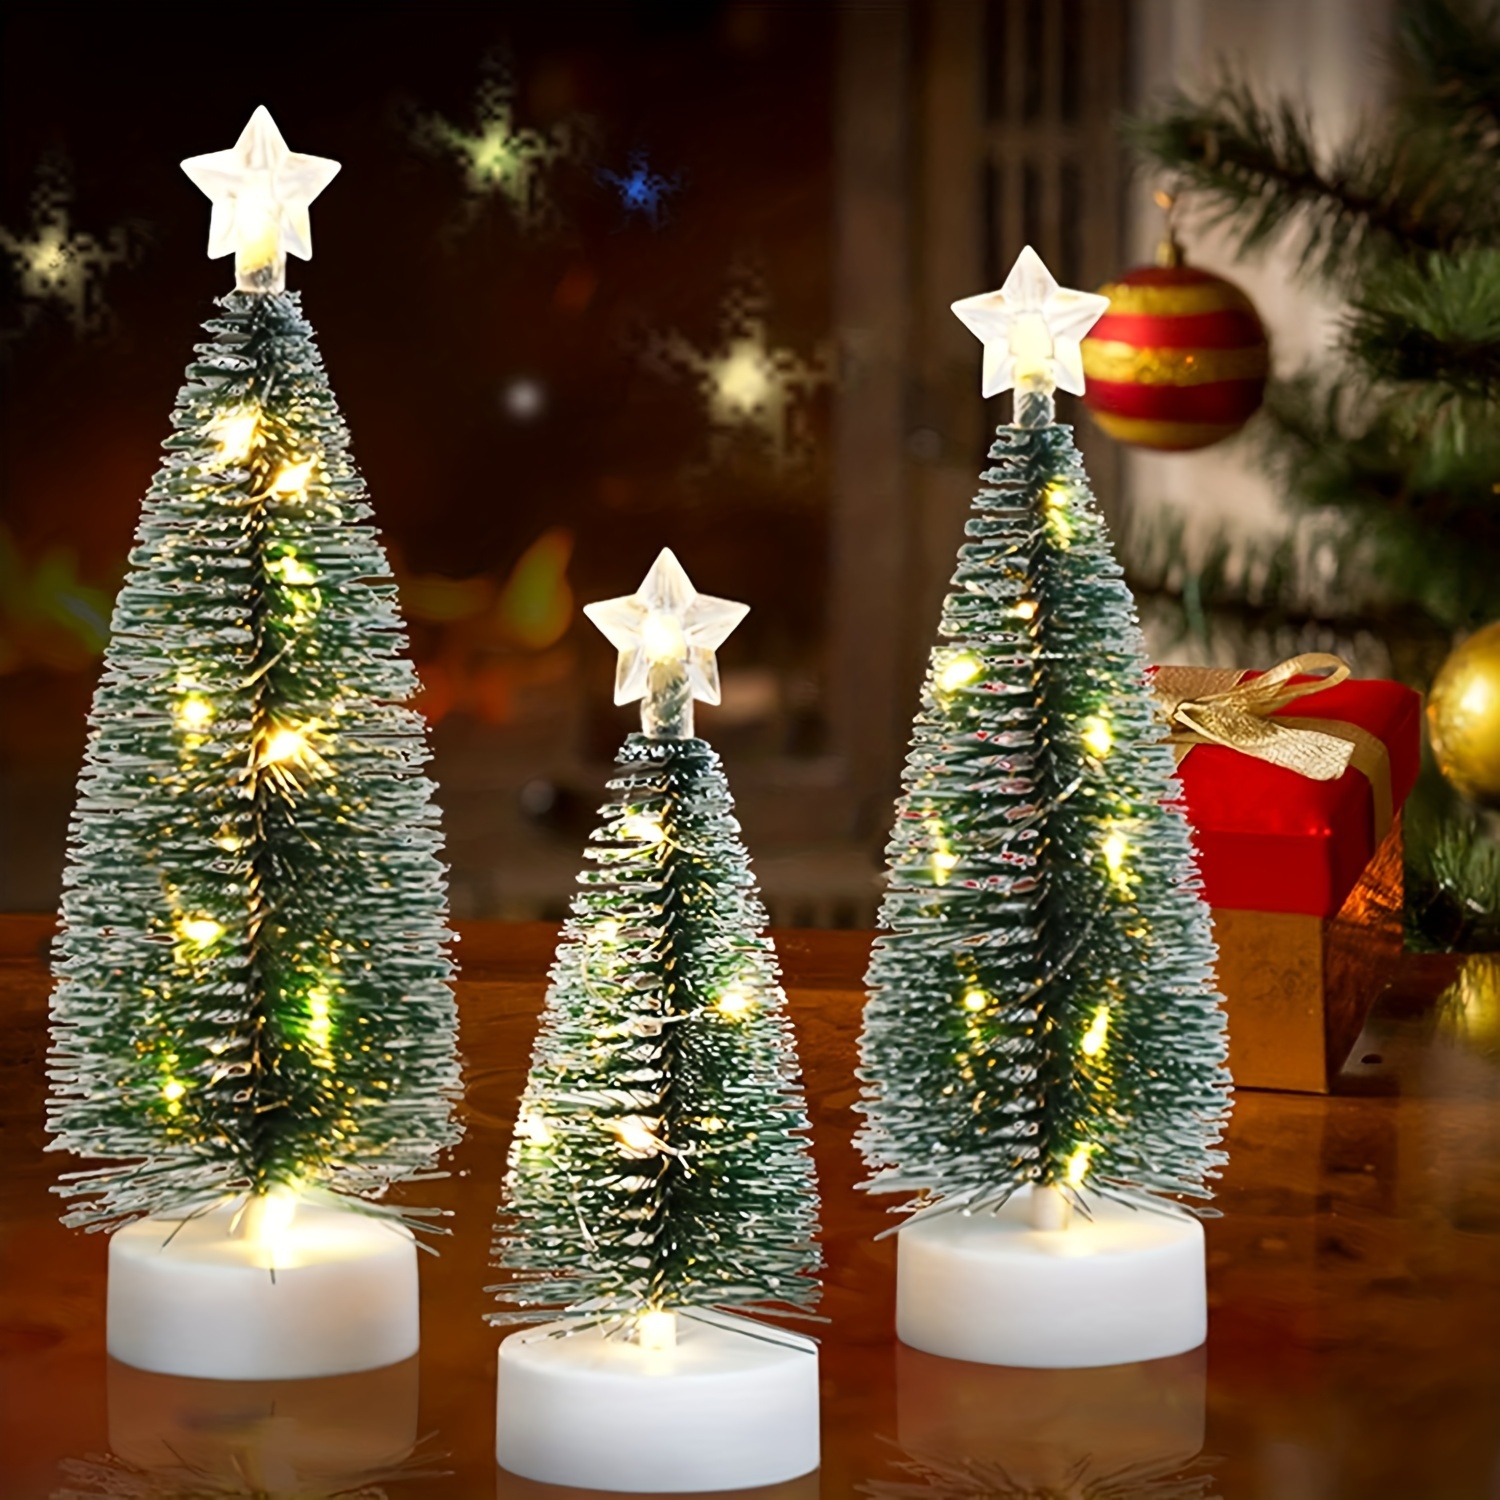 22 Colorful Tabletop Tree Christmas Decorations for a Small Space